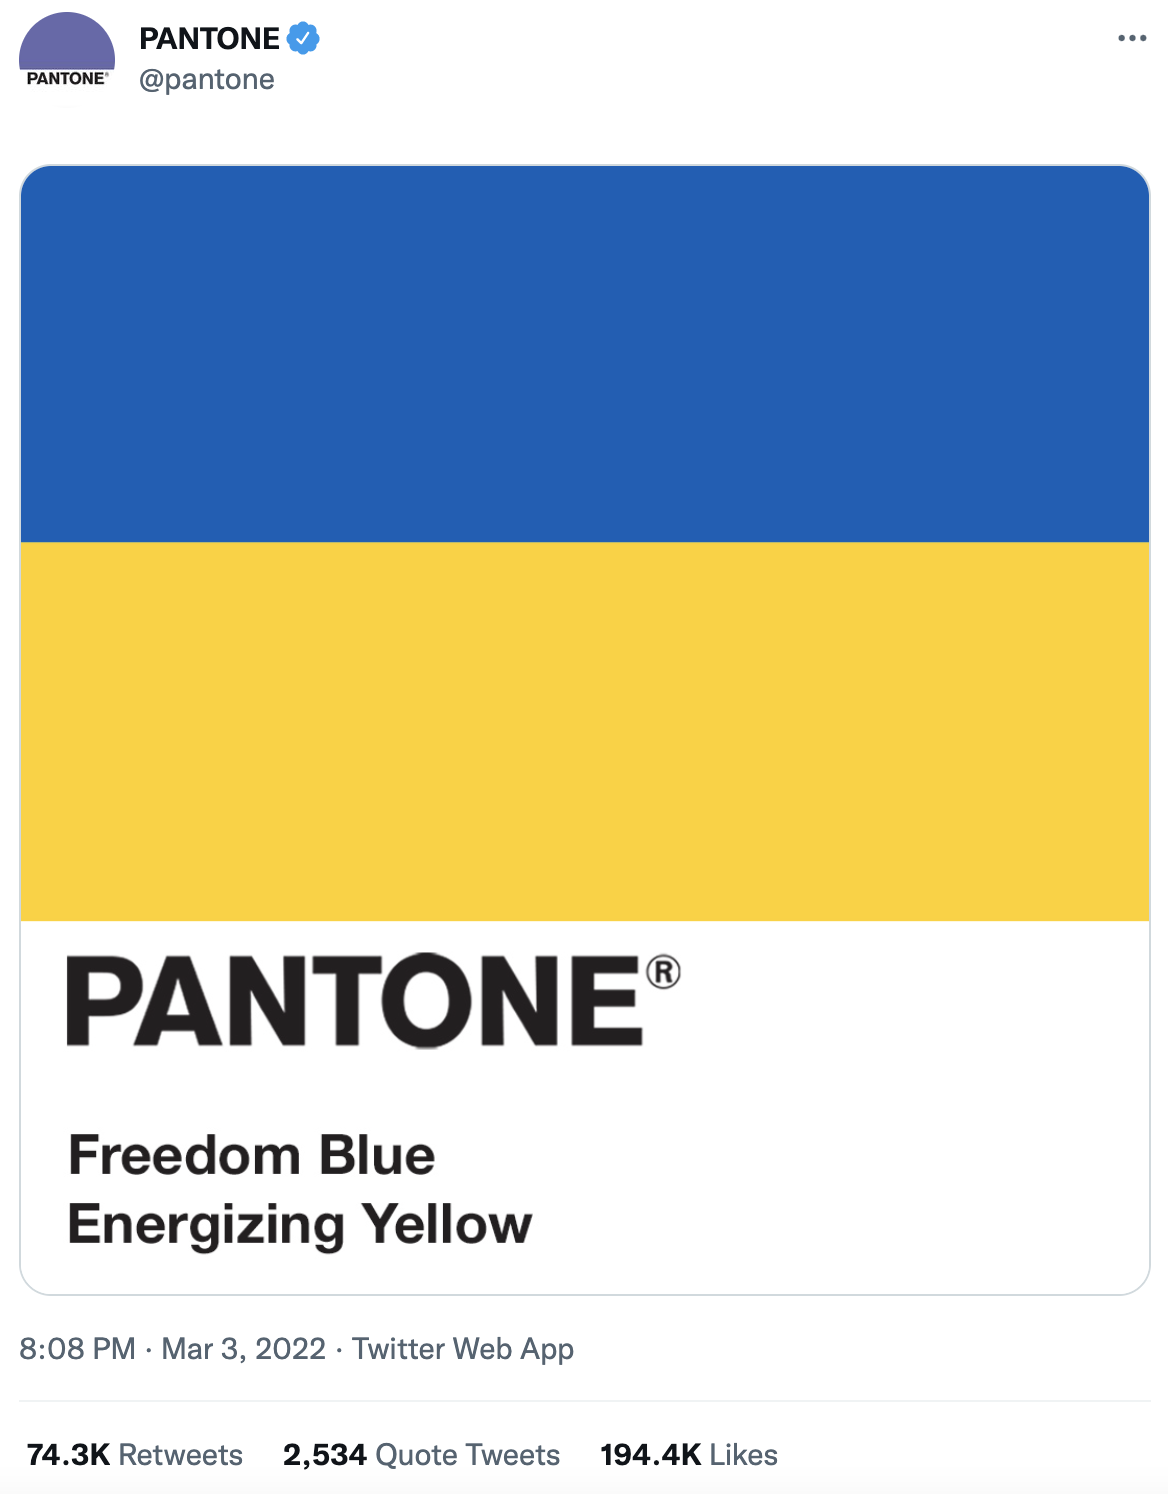 Pantone How to Communicate Your Brand’s Stance